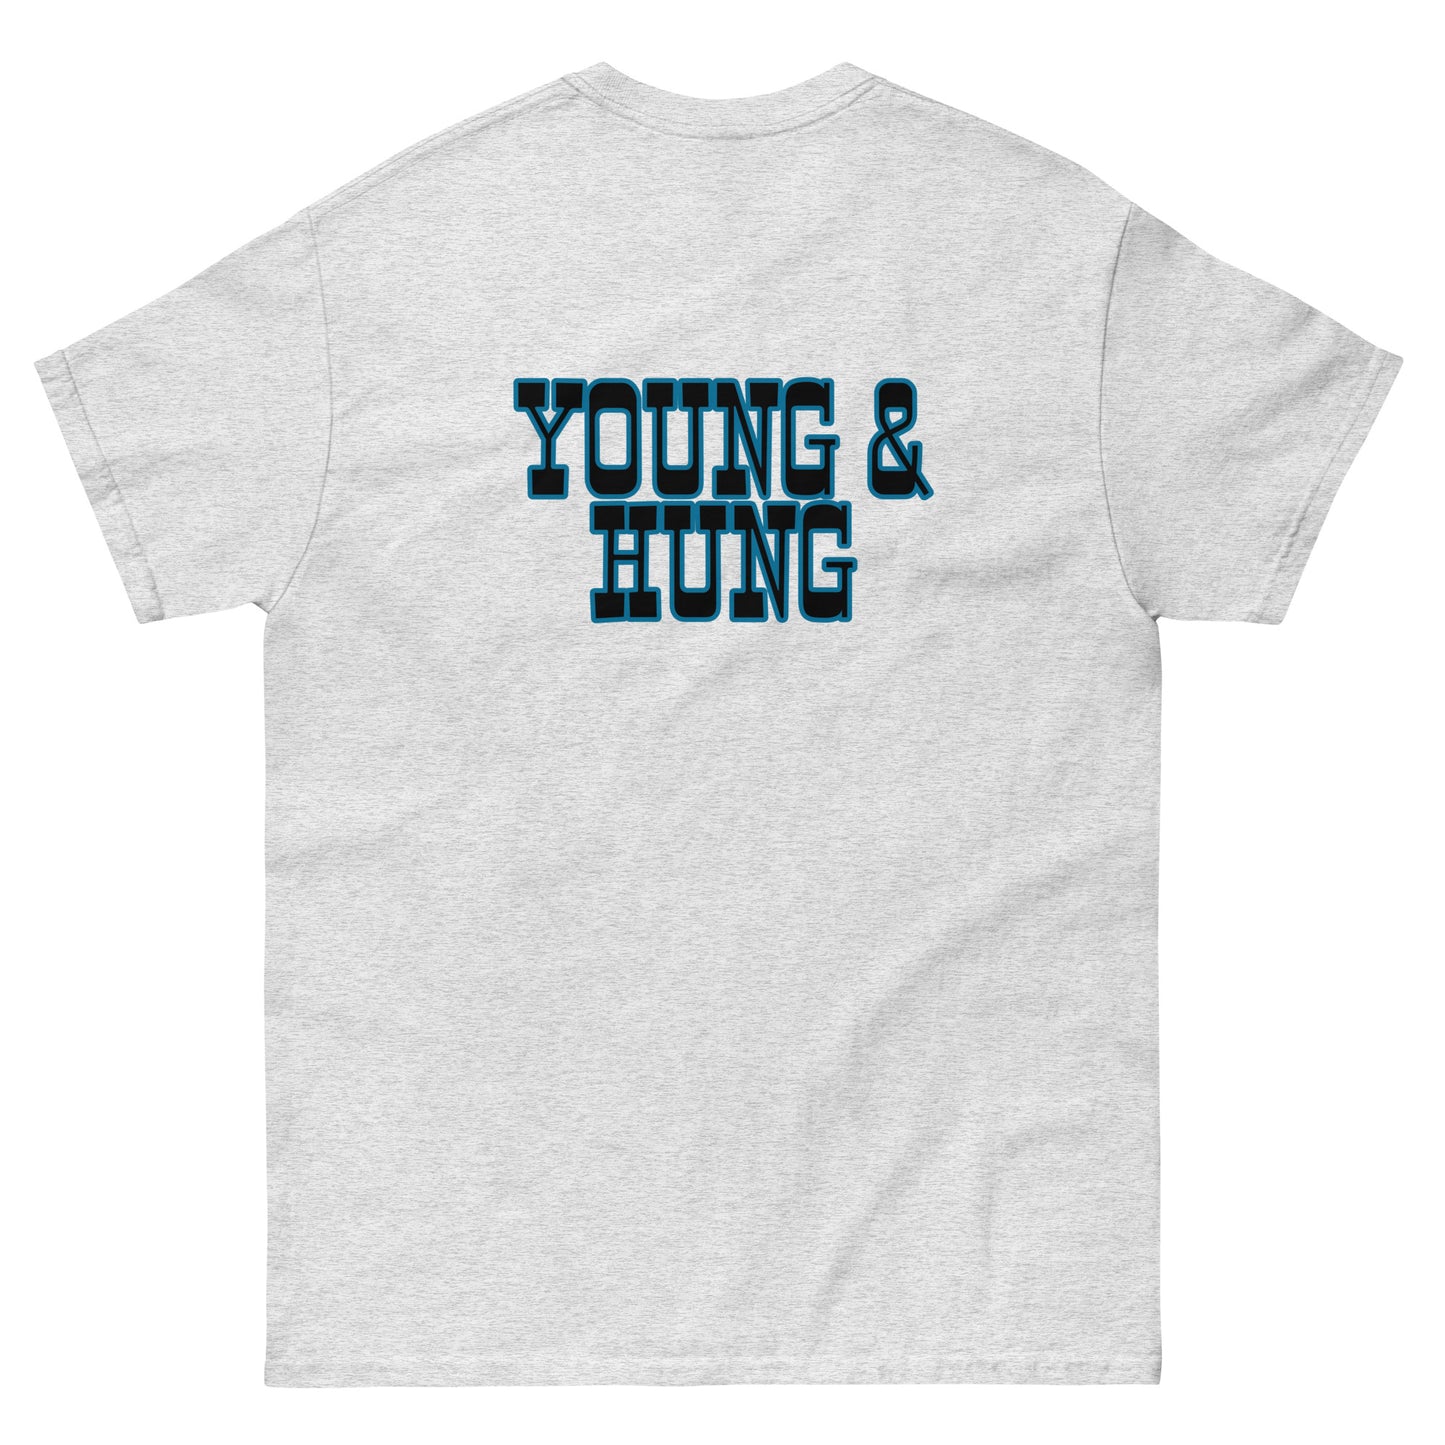 YOUNG & HUNG VOYOU T